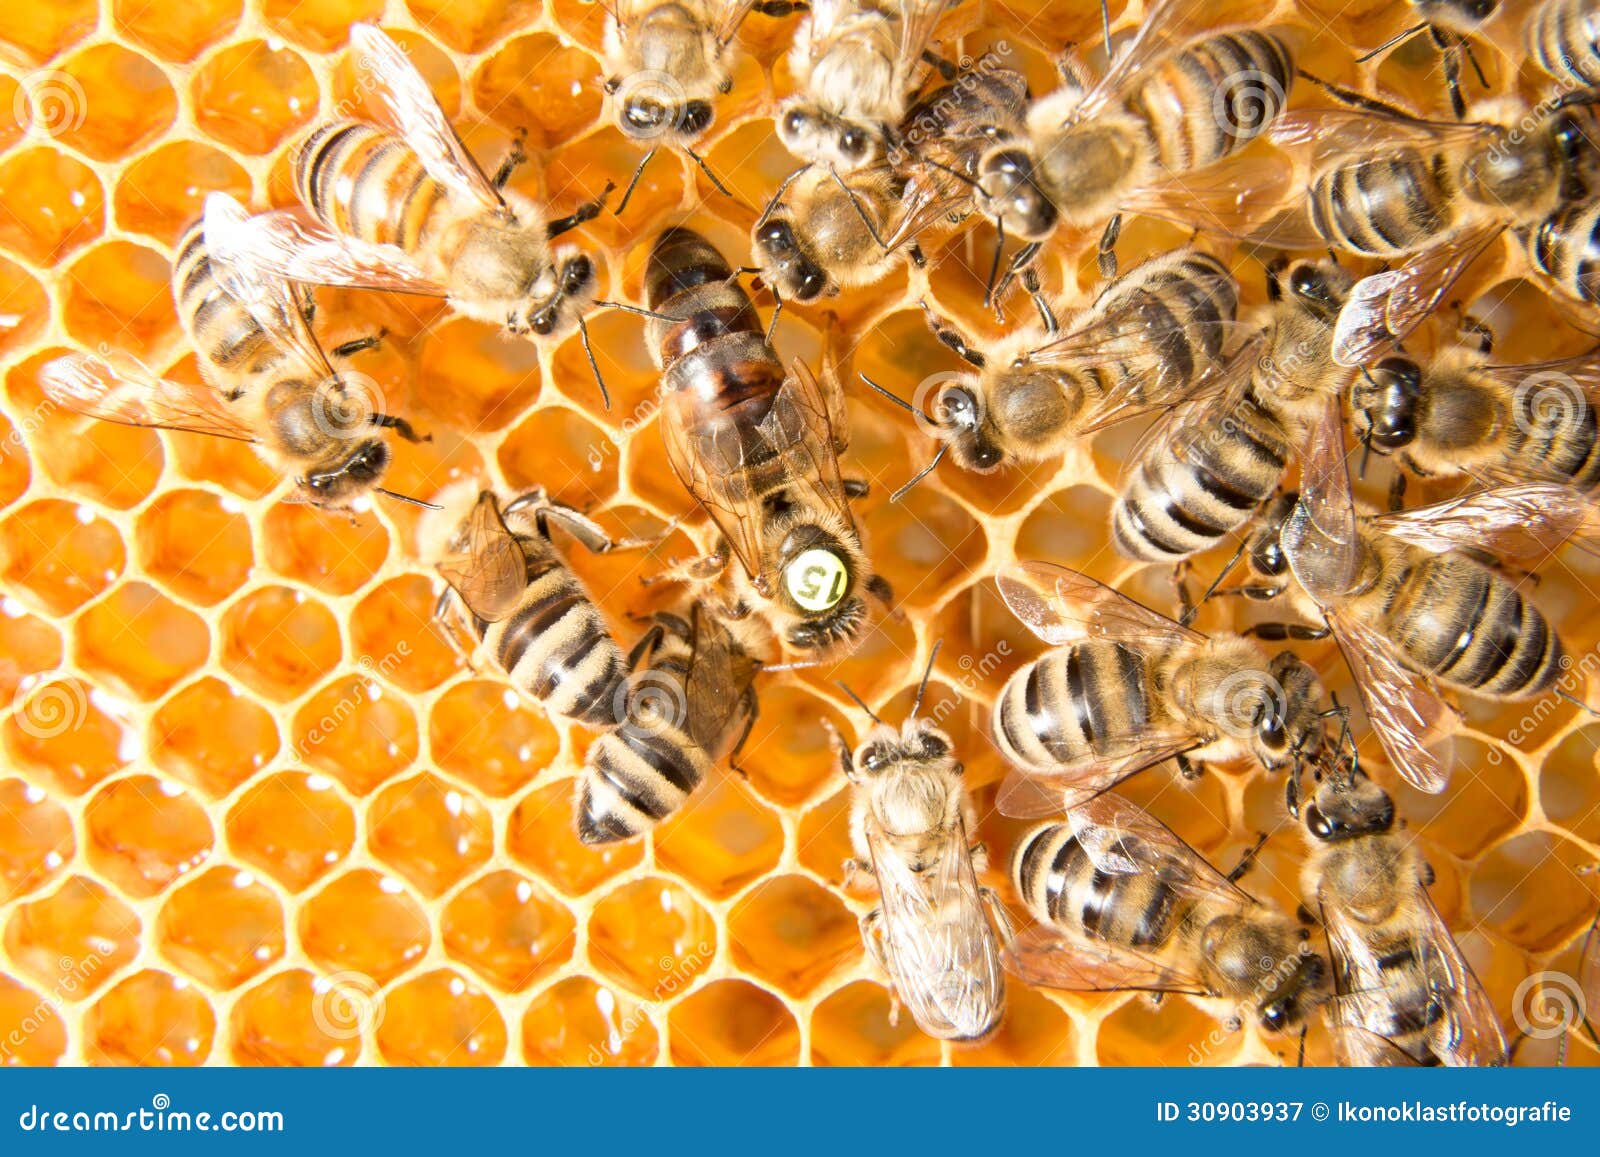 Queen Bee In Bee Hive Laying Eggs Stock Image - Image of ...